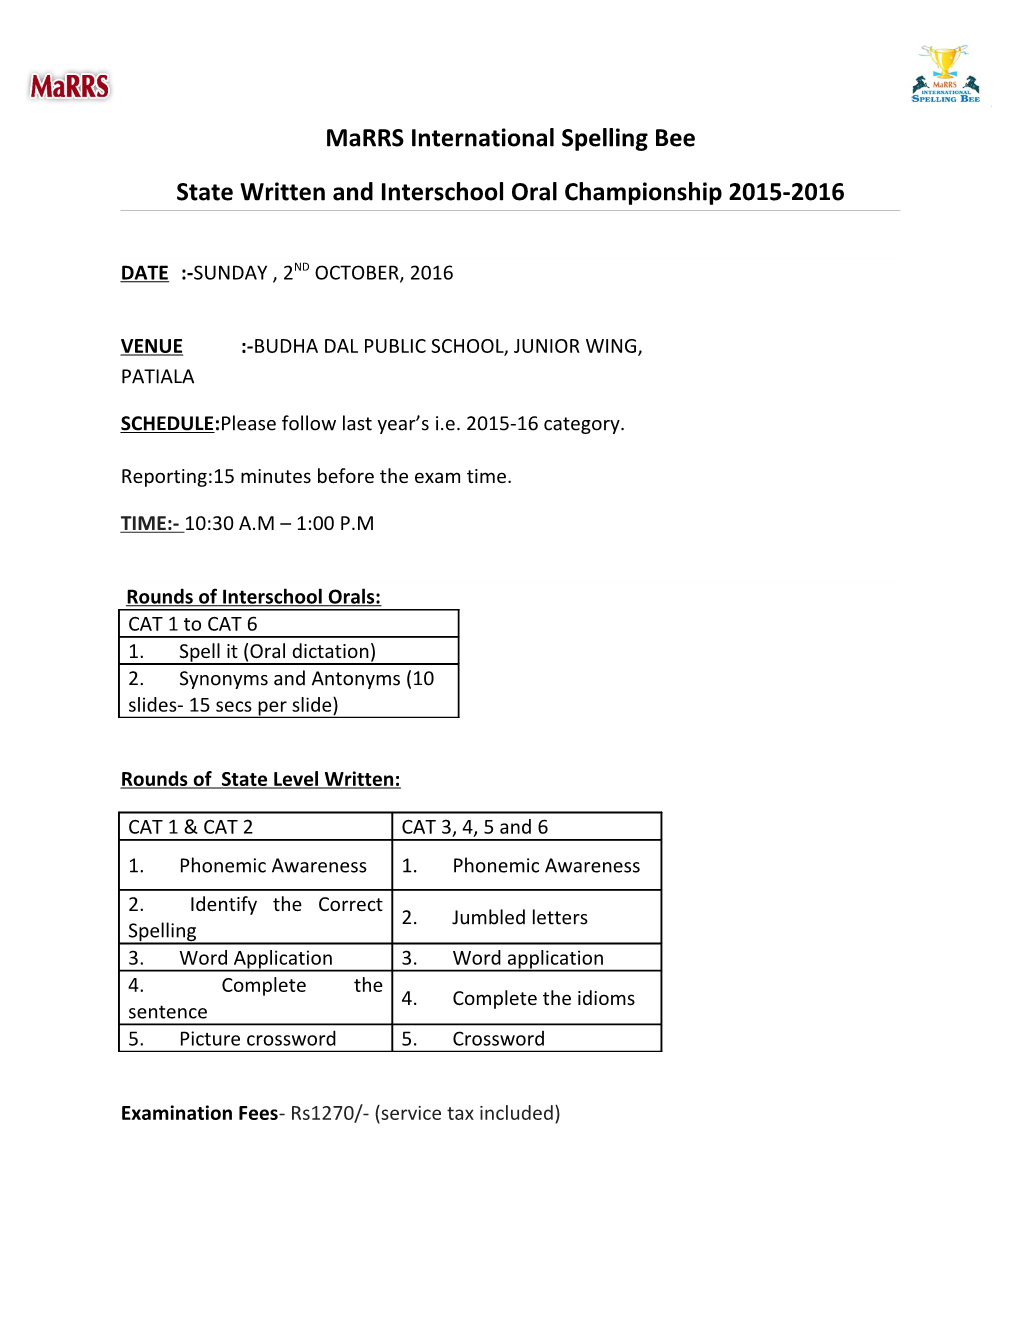 State Written and Interschool Oral Championship 2015-2016